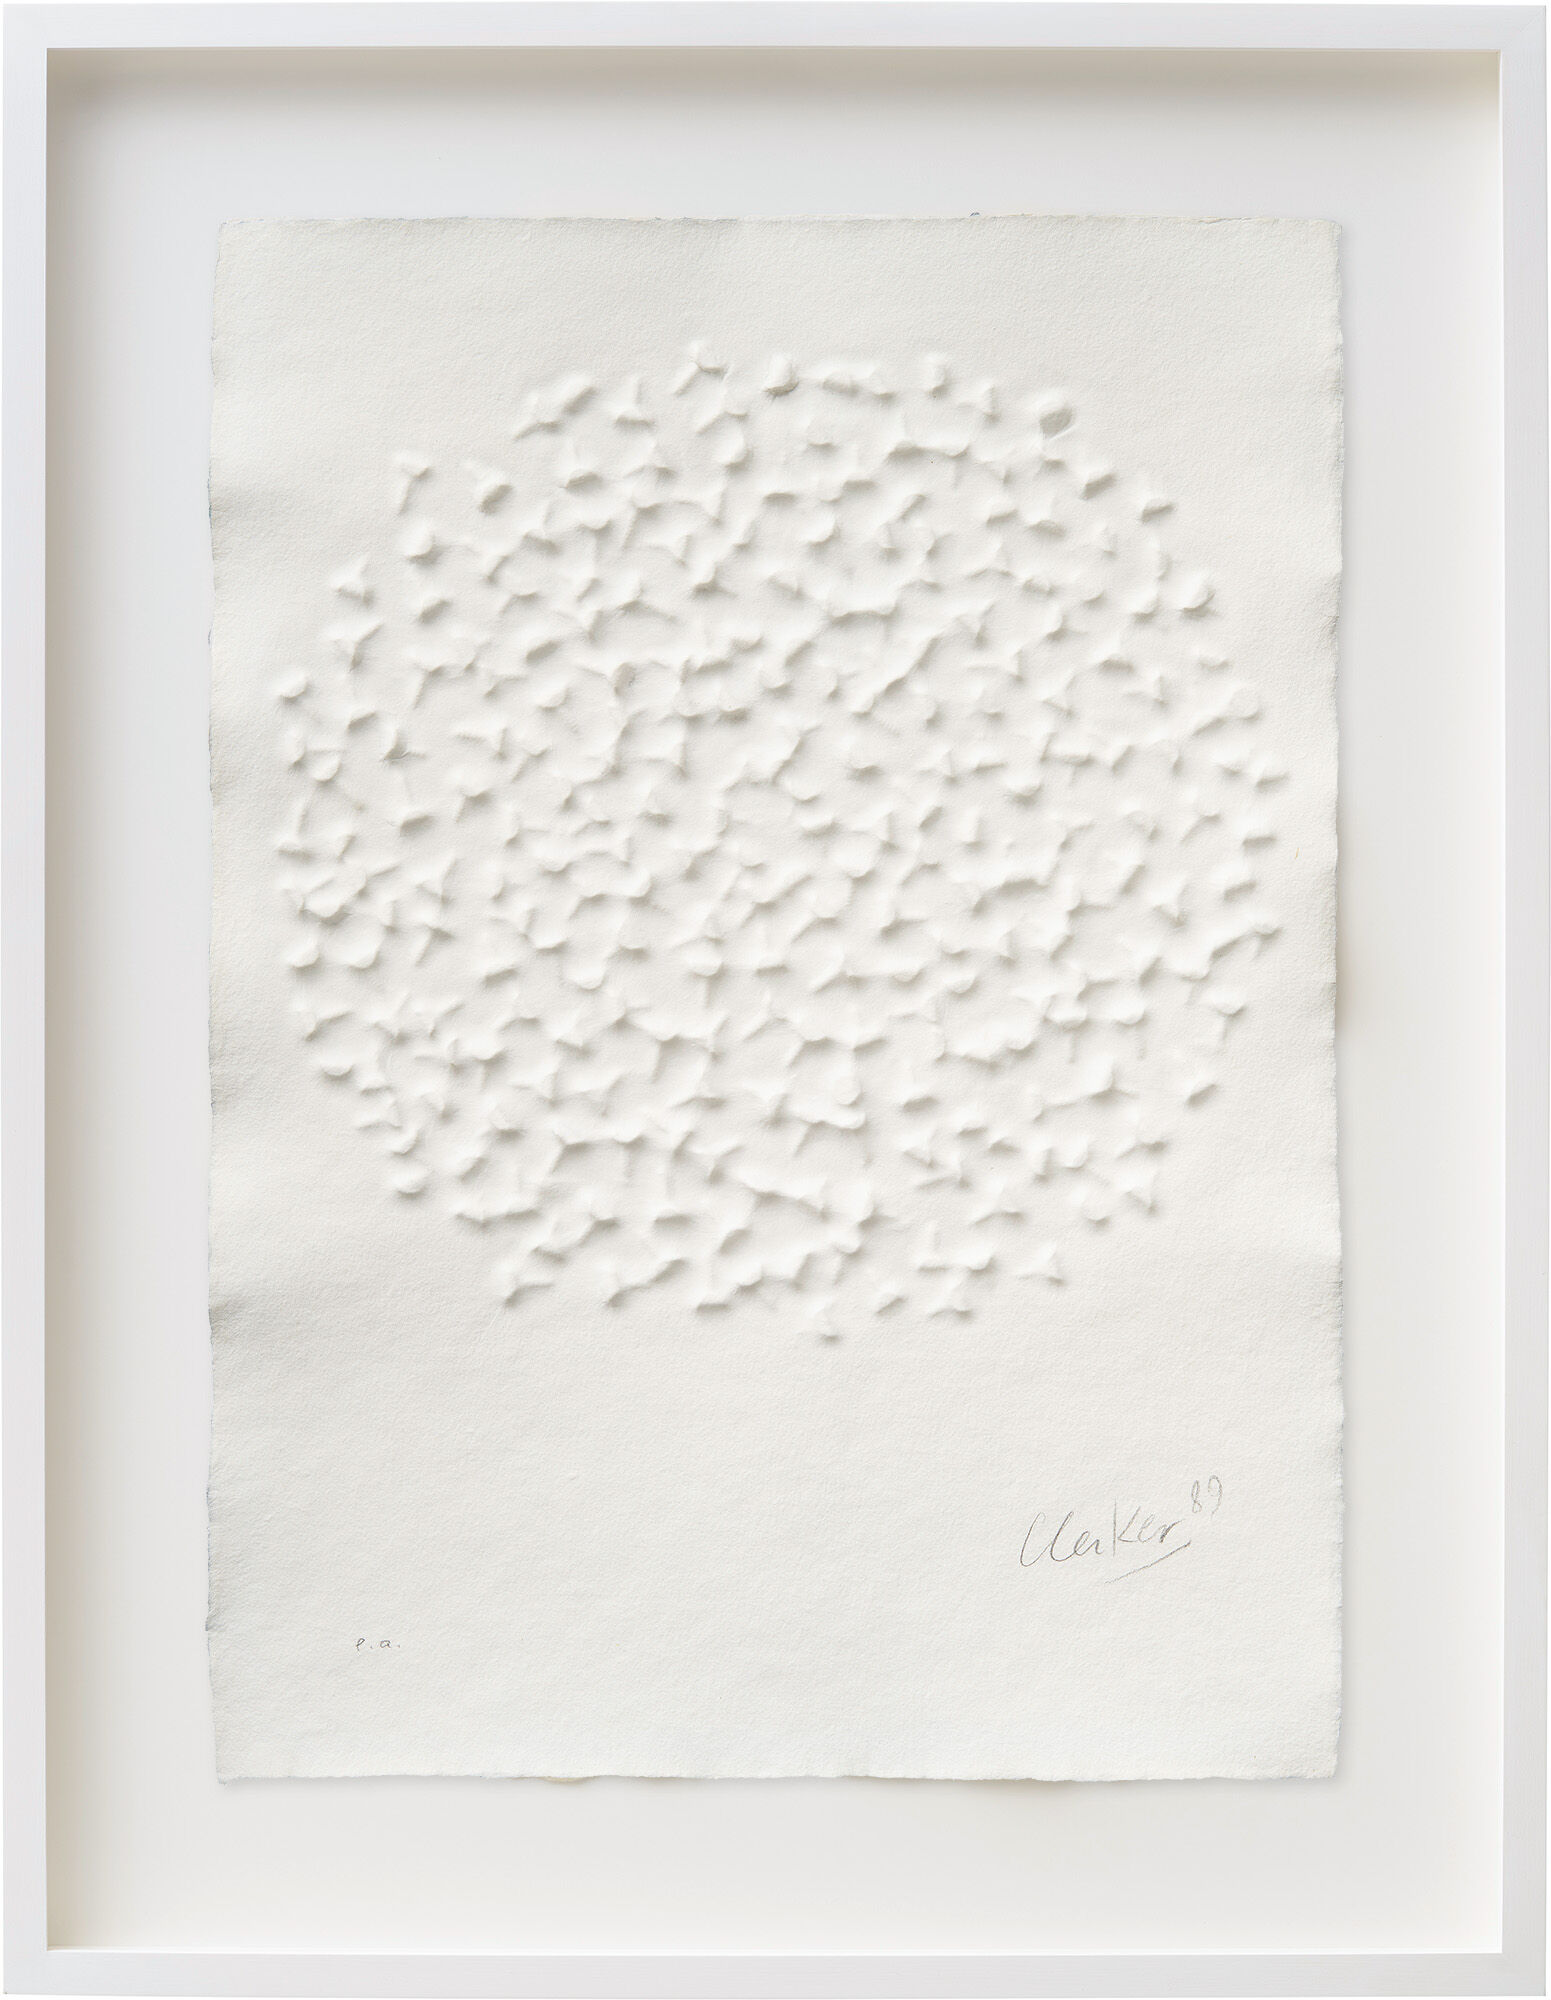 Picture "White Cloud" (1989) by Günther Uecker